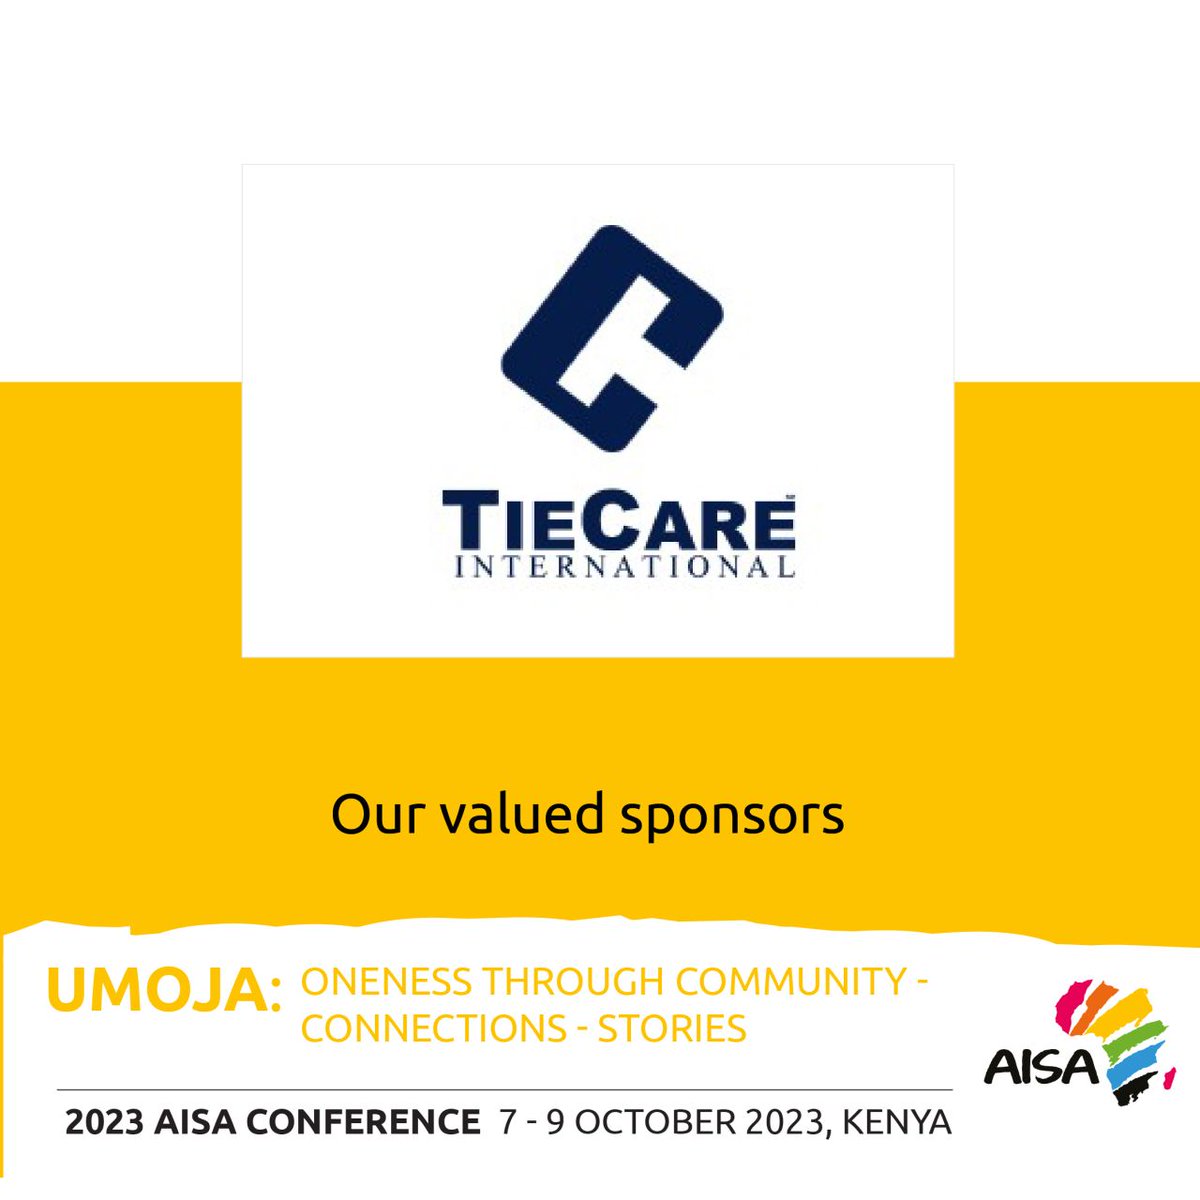 AISA would like to thank TieCare for sponsoring the Pre-Conference Counsellors Institute at the 2023 AISA Conference. Your support is valued and appreciated. Click here to learn more: ow.ly/YQ9H50Pp2sw #aisa #conference #umoja #sponsorship #seeyouthere